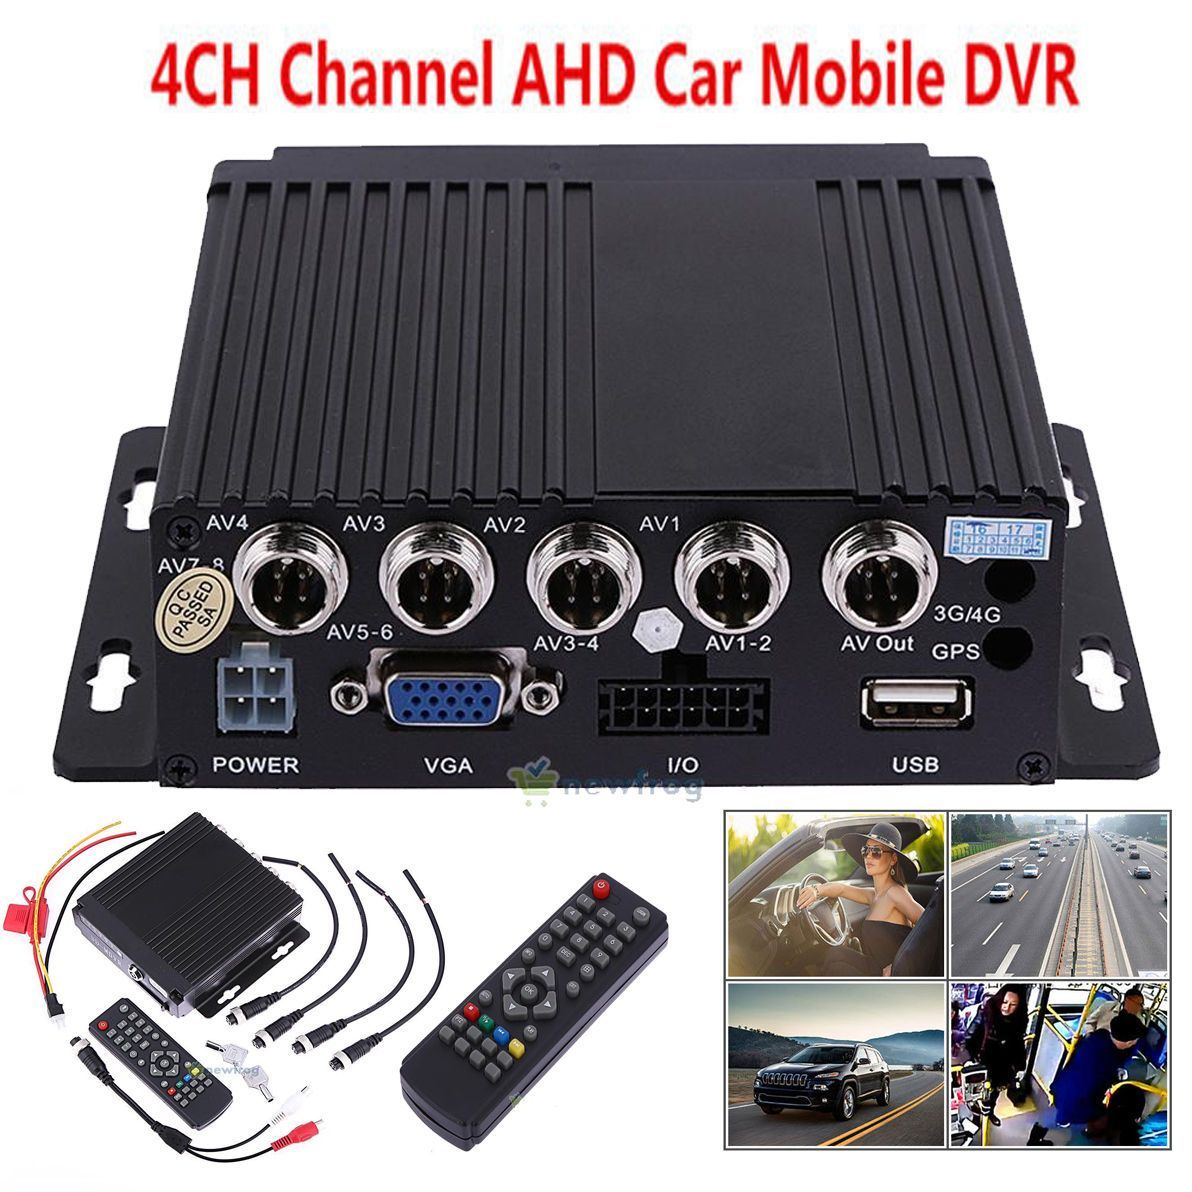 SW-0001A-12V-Mobile-HD-DVR-Realtime-Video-Audio-Recorder-Bus-Car-DVR-With-Remote-1351697